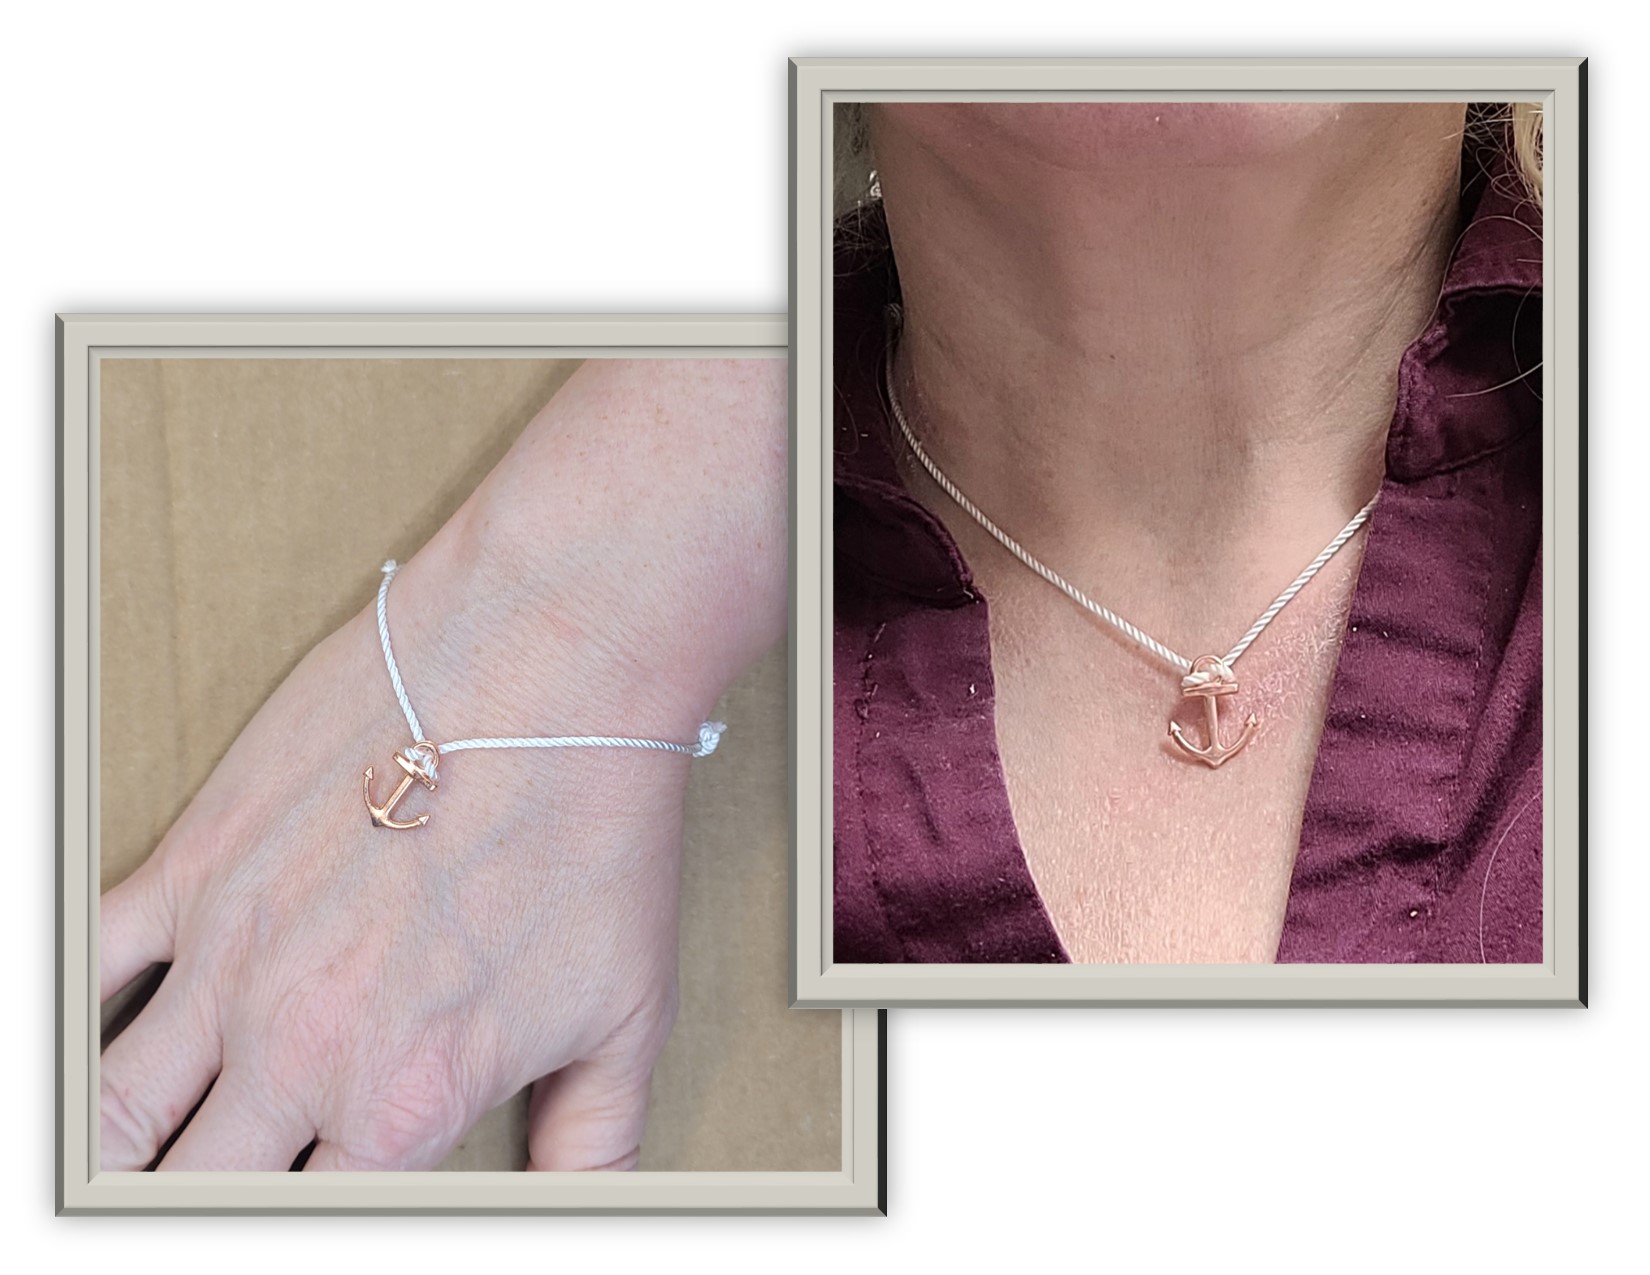 Images of a cord necklace and bracelet with anchor charms